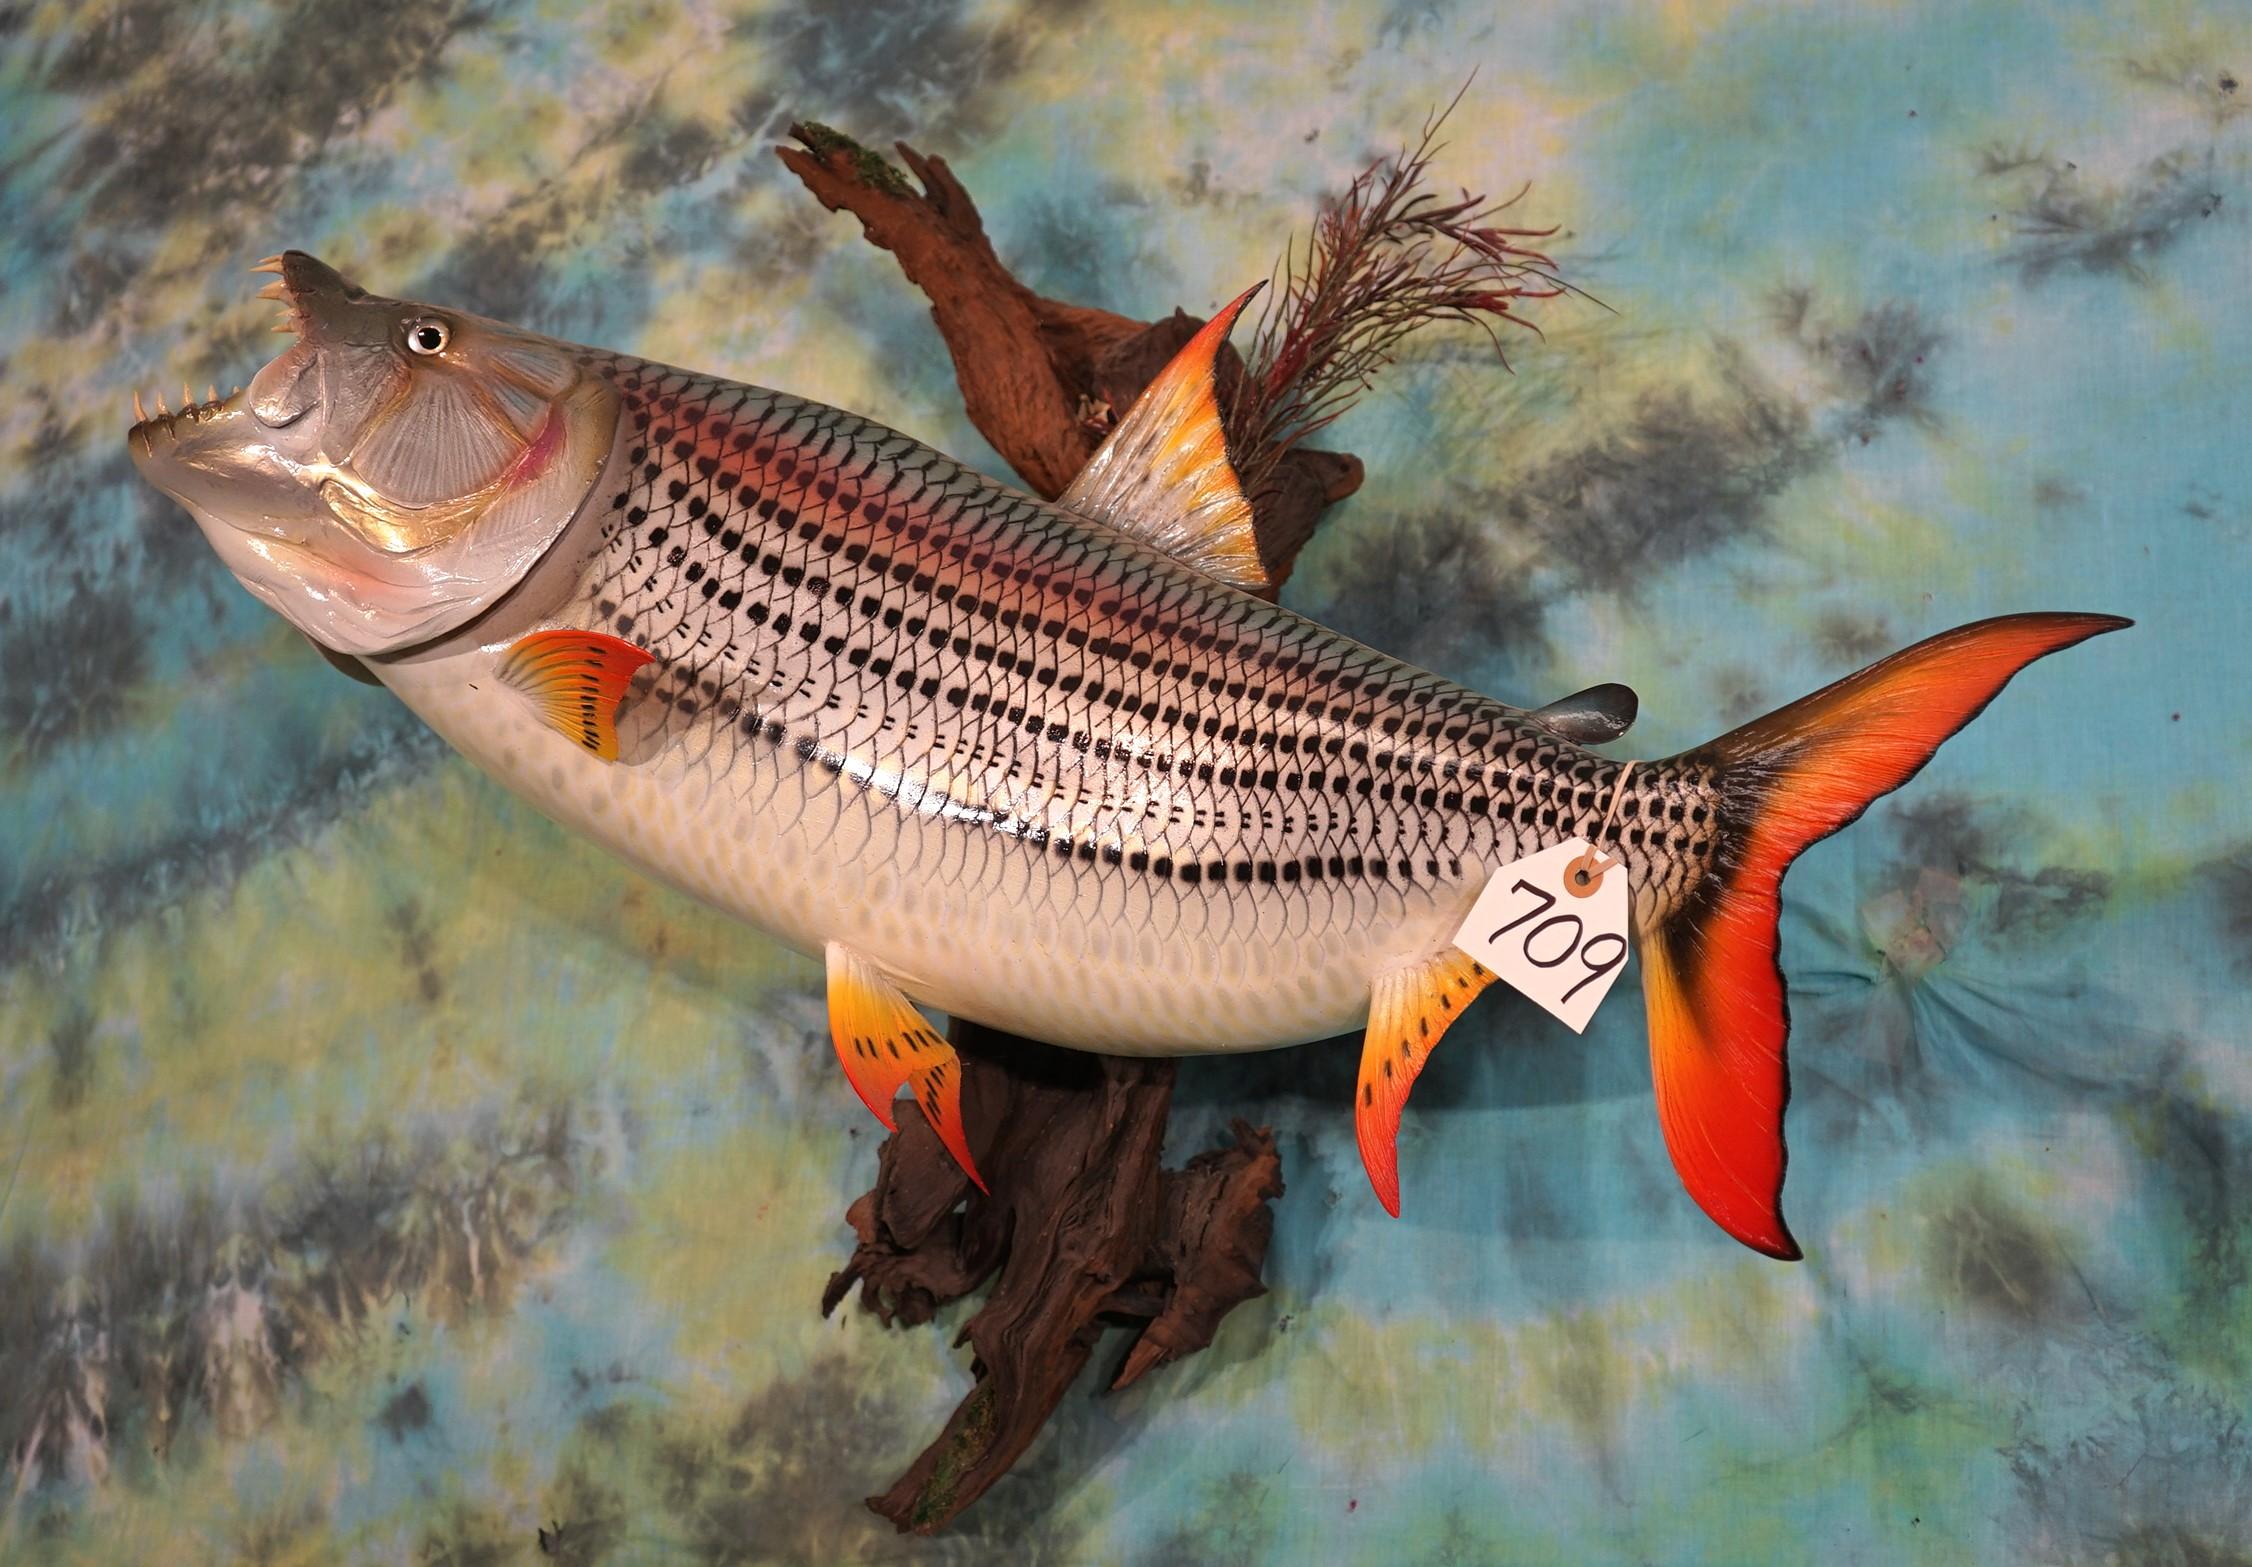 Beautiful Brand New! 32" African Tiger Fish High Quality Fiberglass Reproduction Taxidermy Mount